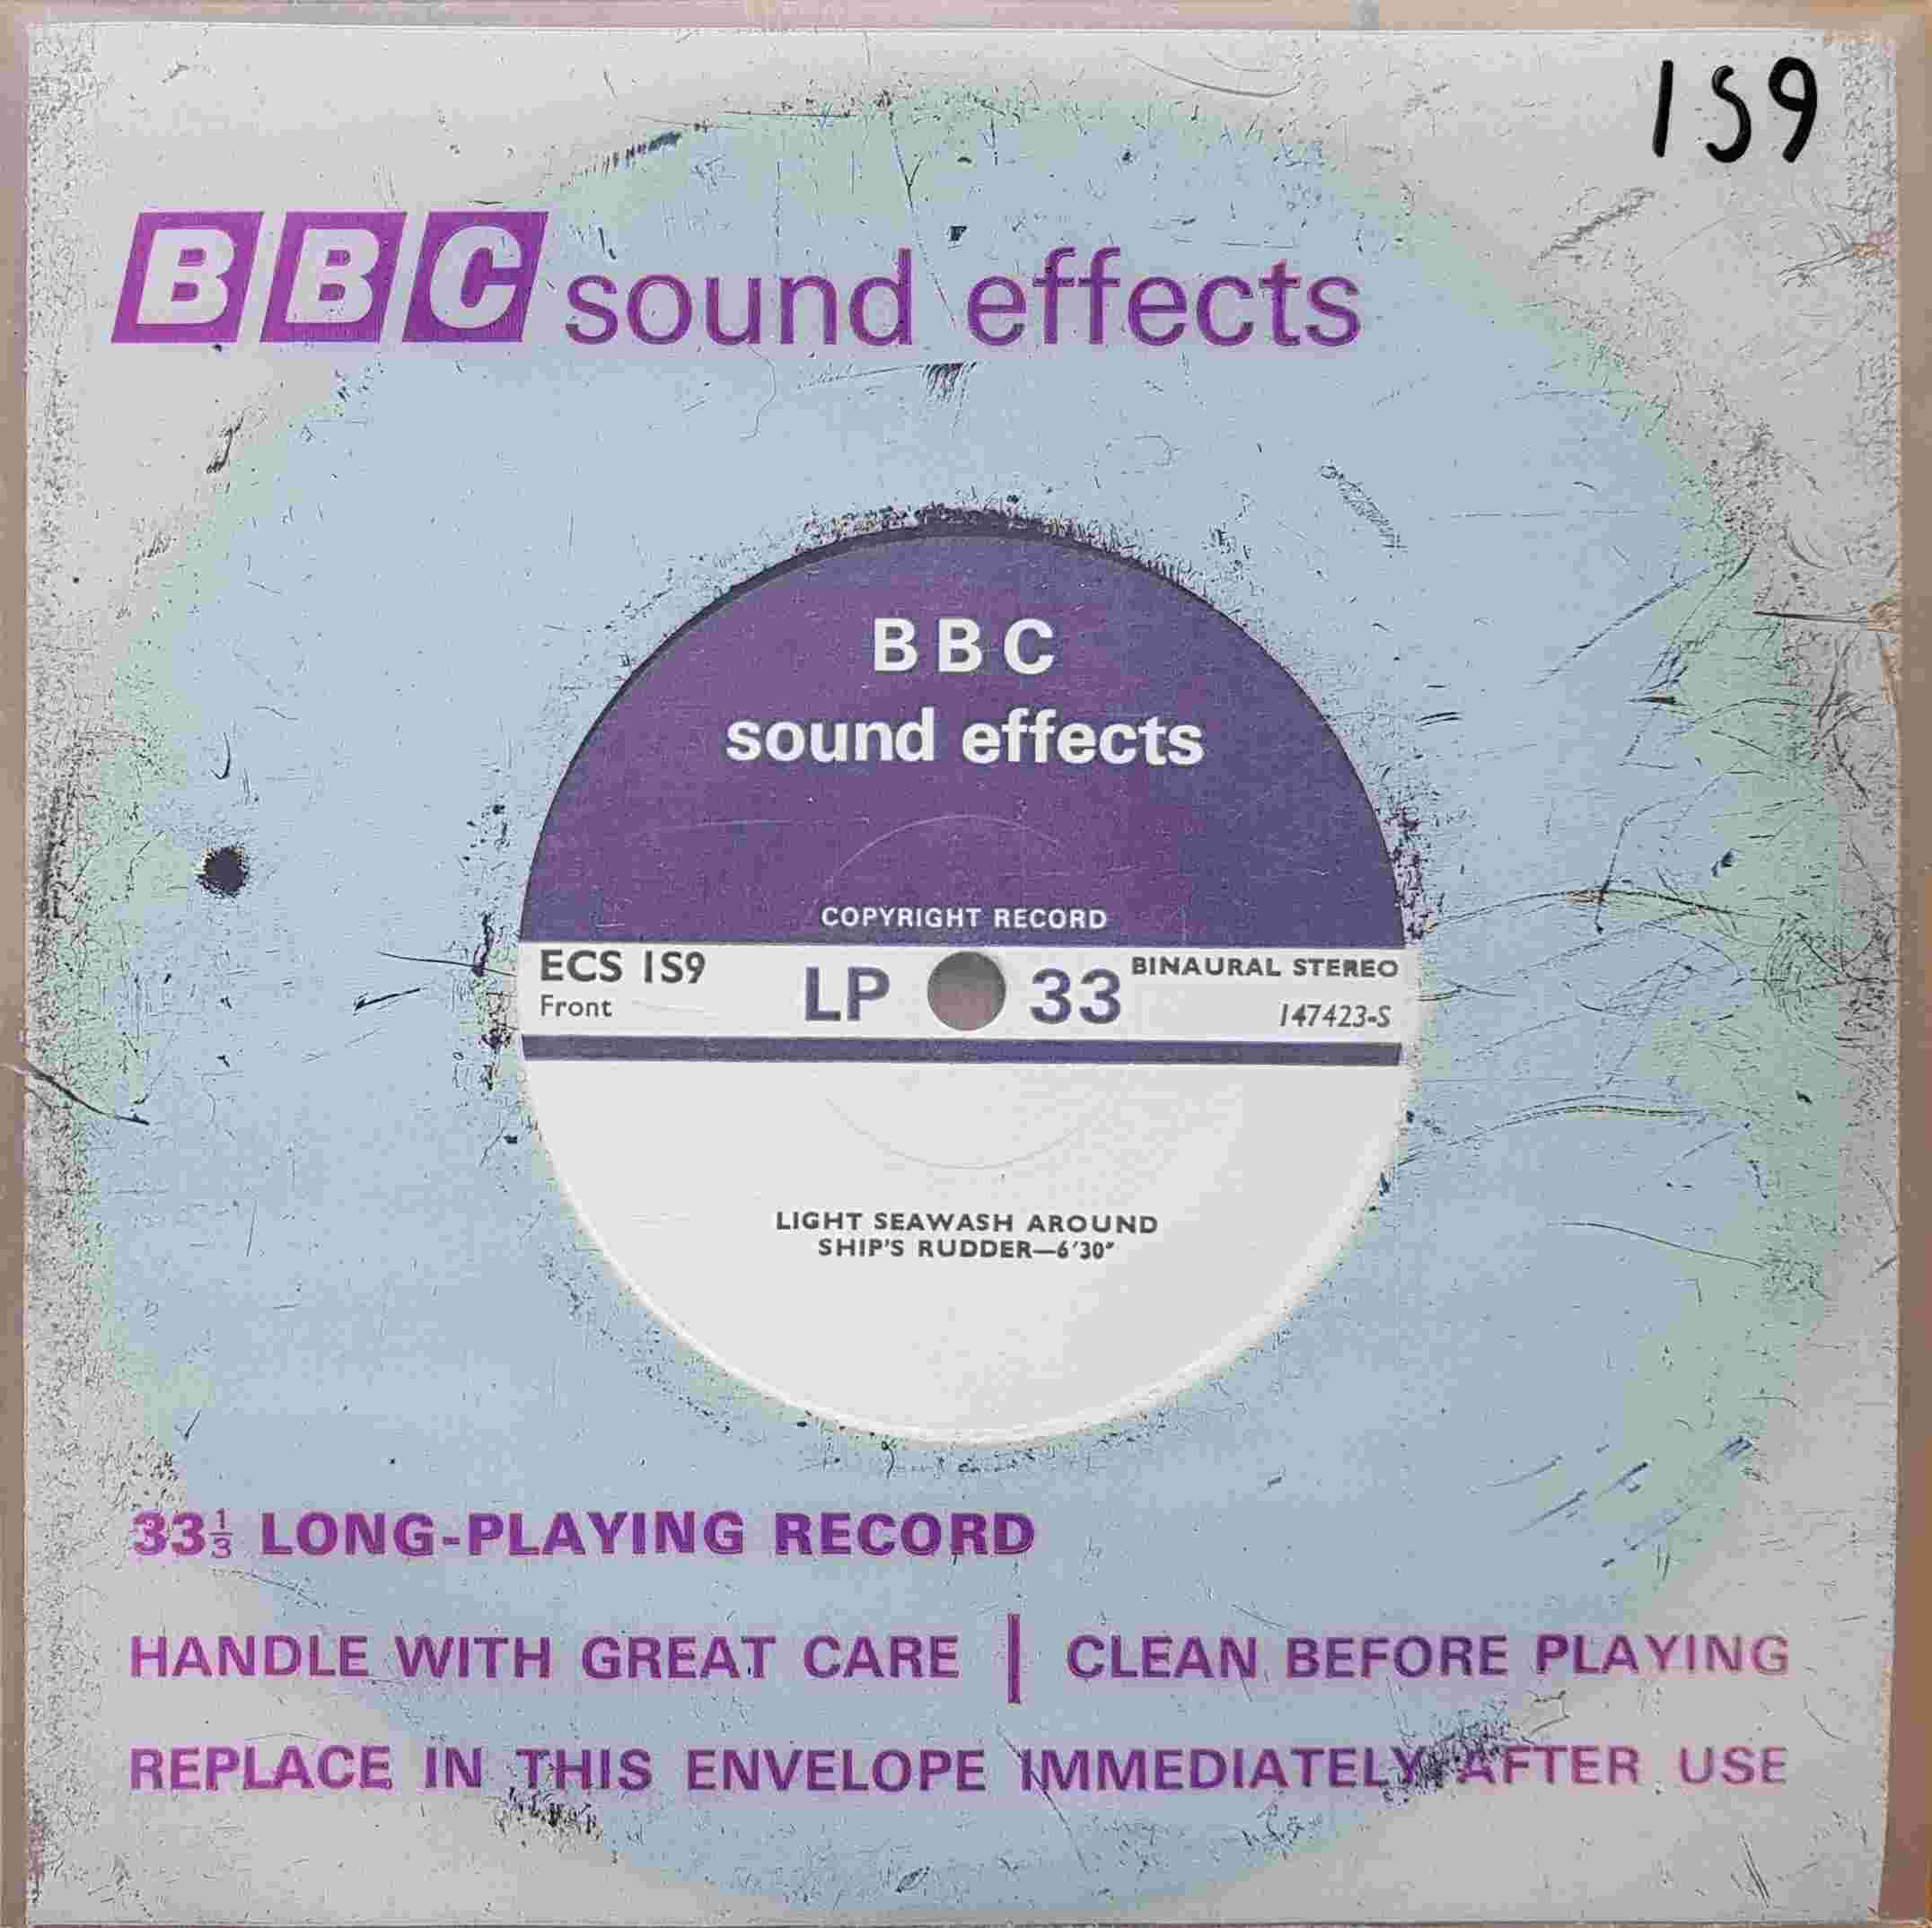 Picture of ECS 1S9 Light seawash / Water rippling against quayside by artist Not registered from the BBC singles - Records and Tapes library